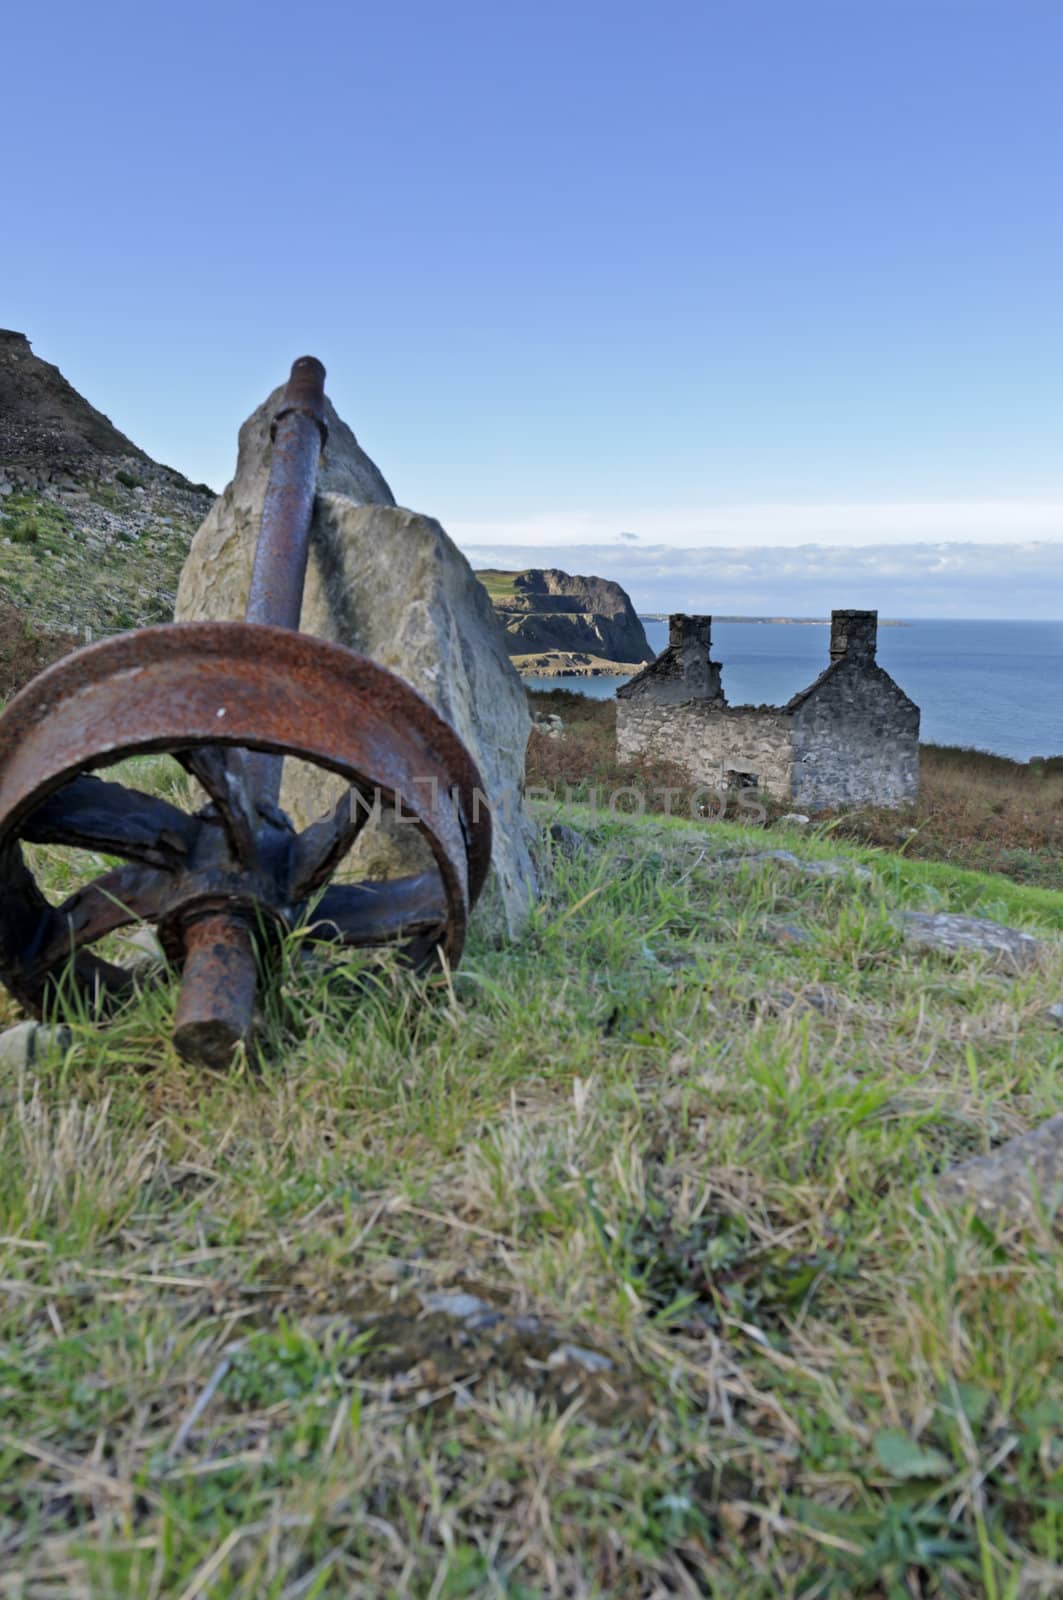 Nant Gwrtheyrn a former quarrying village on the northern coast of the Llyn Peninsula Wales